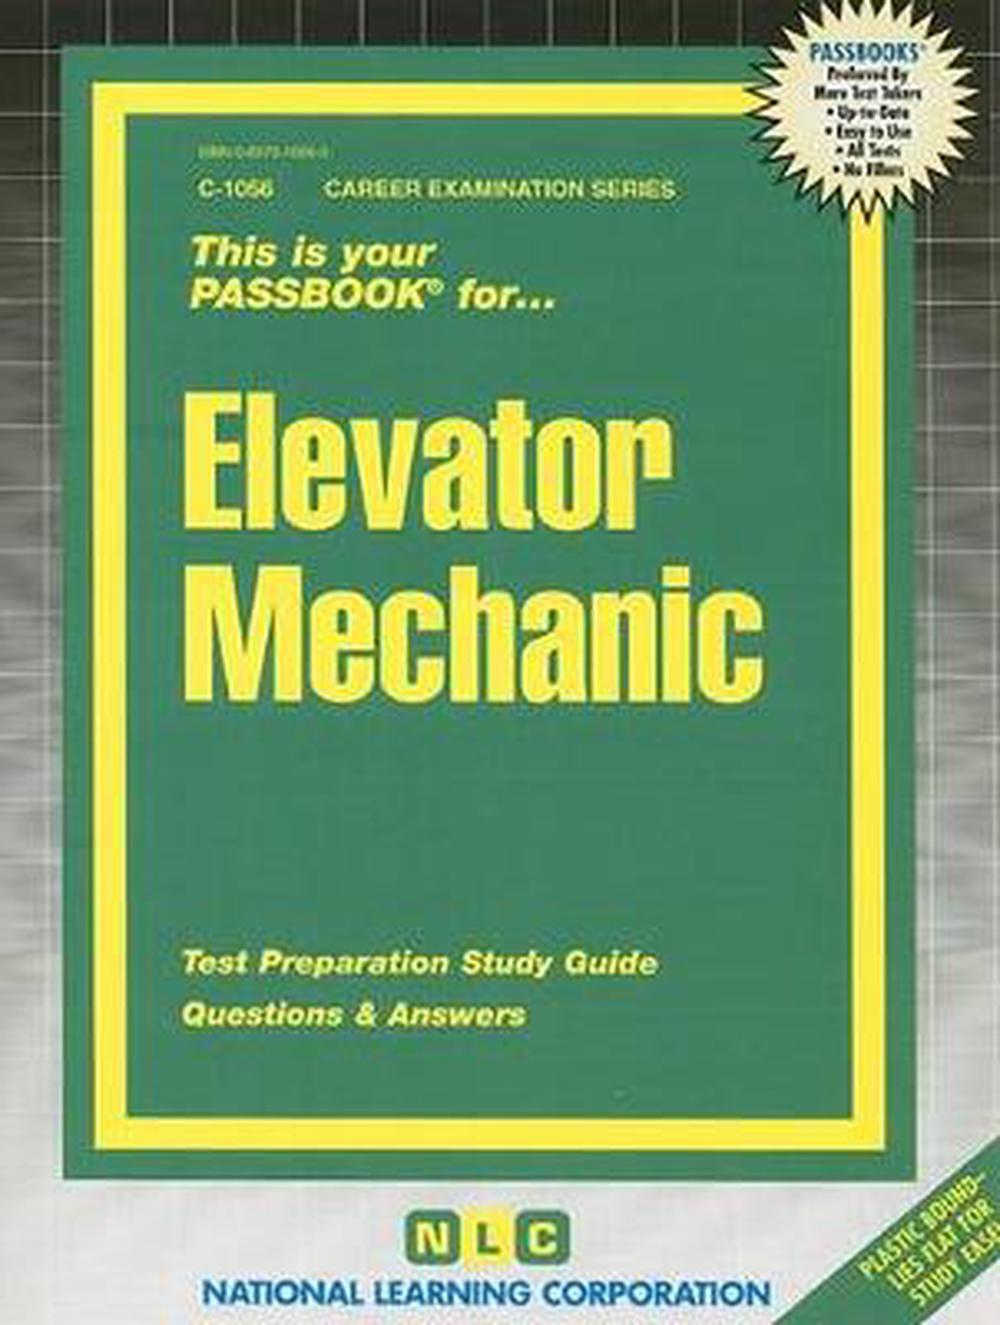 elevator-mechanic-test-preparation-study-guide-questions-answers-paperback-9780837310565